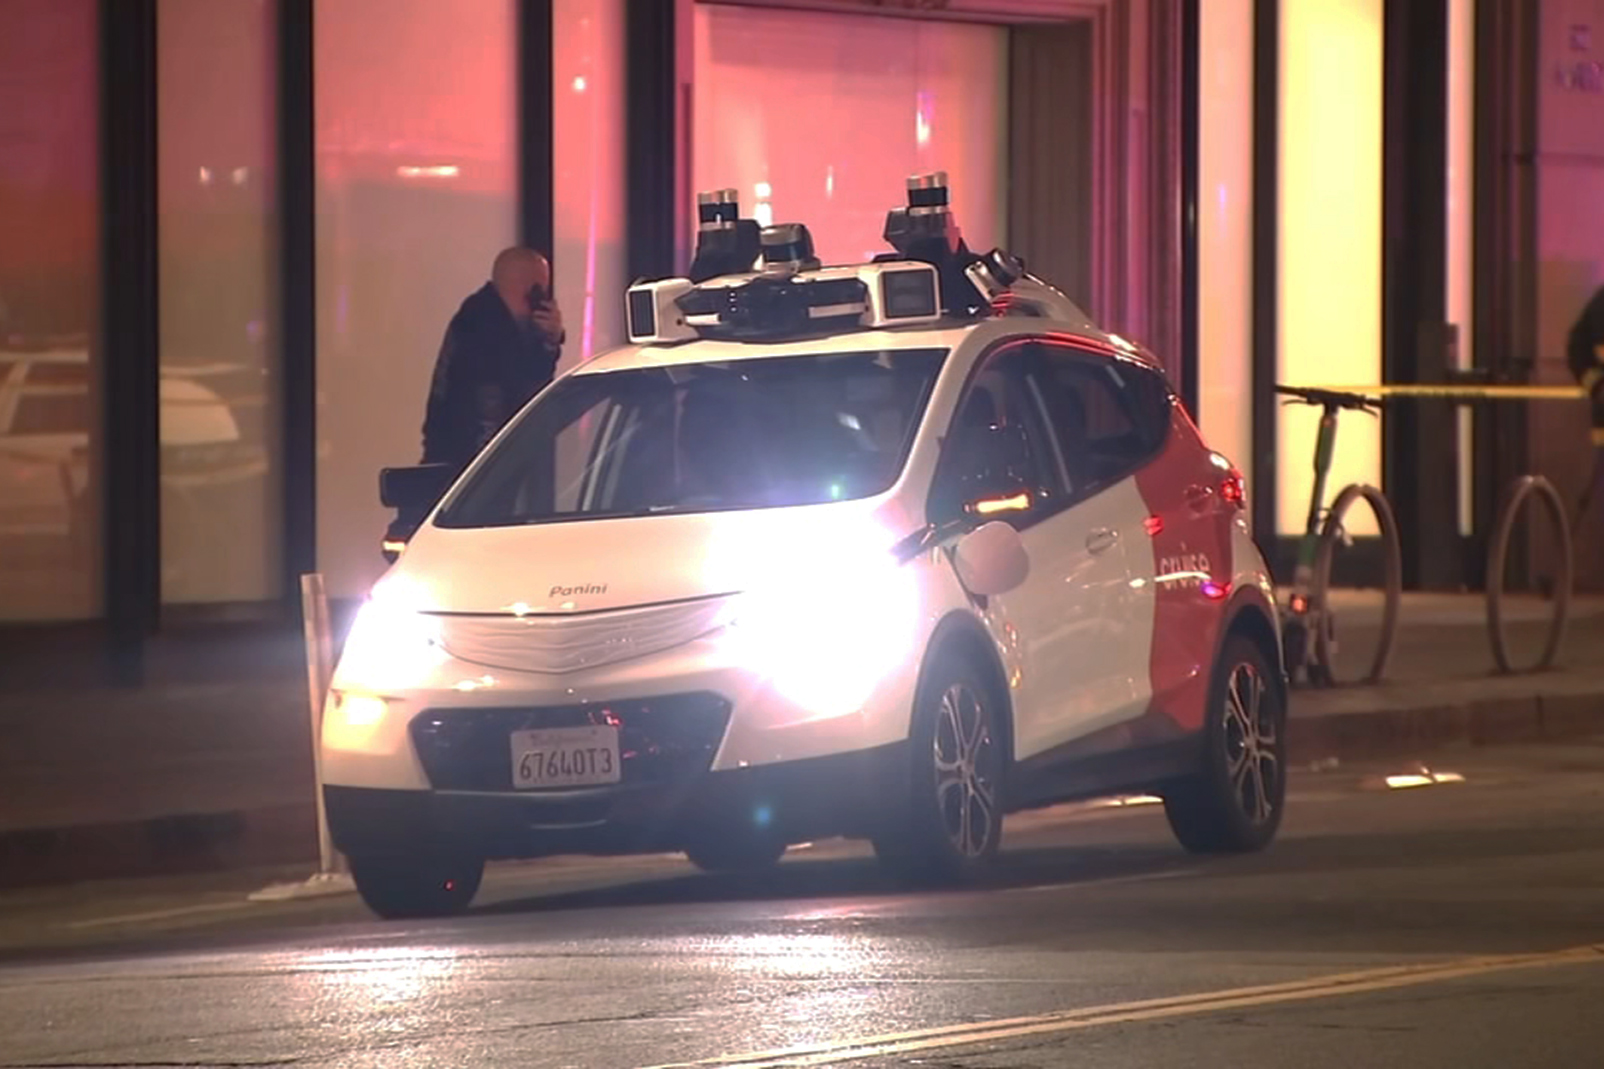 A self-driving car, equipped with multiple sensors on top, is parked on a city street at night, with a man standing nearby talking on a phone.